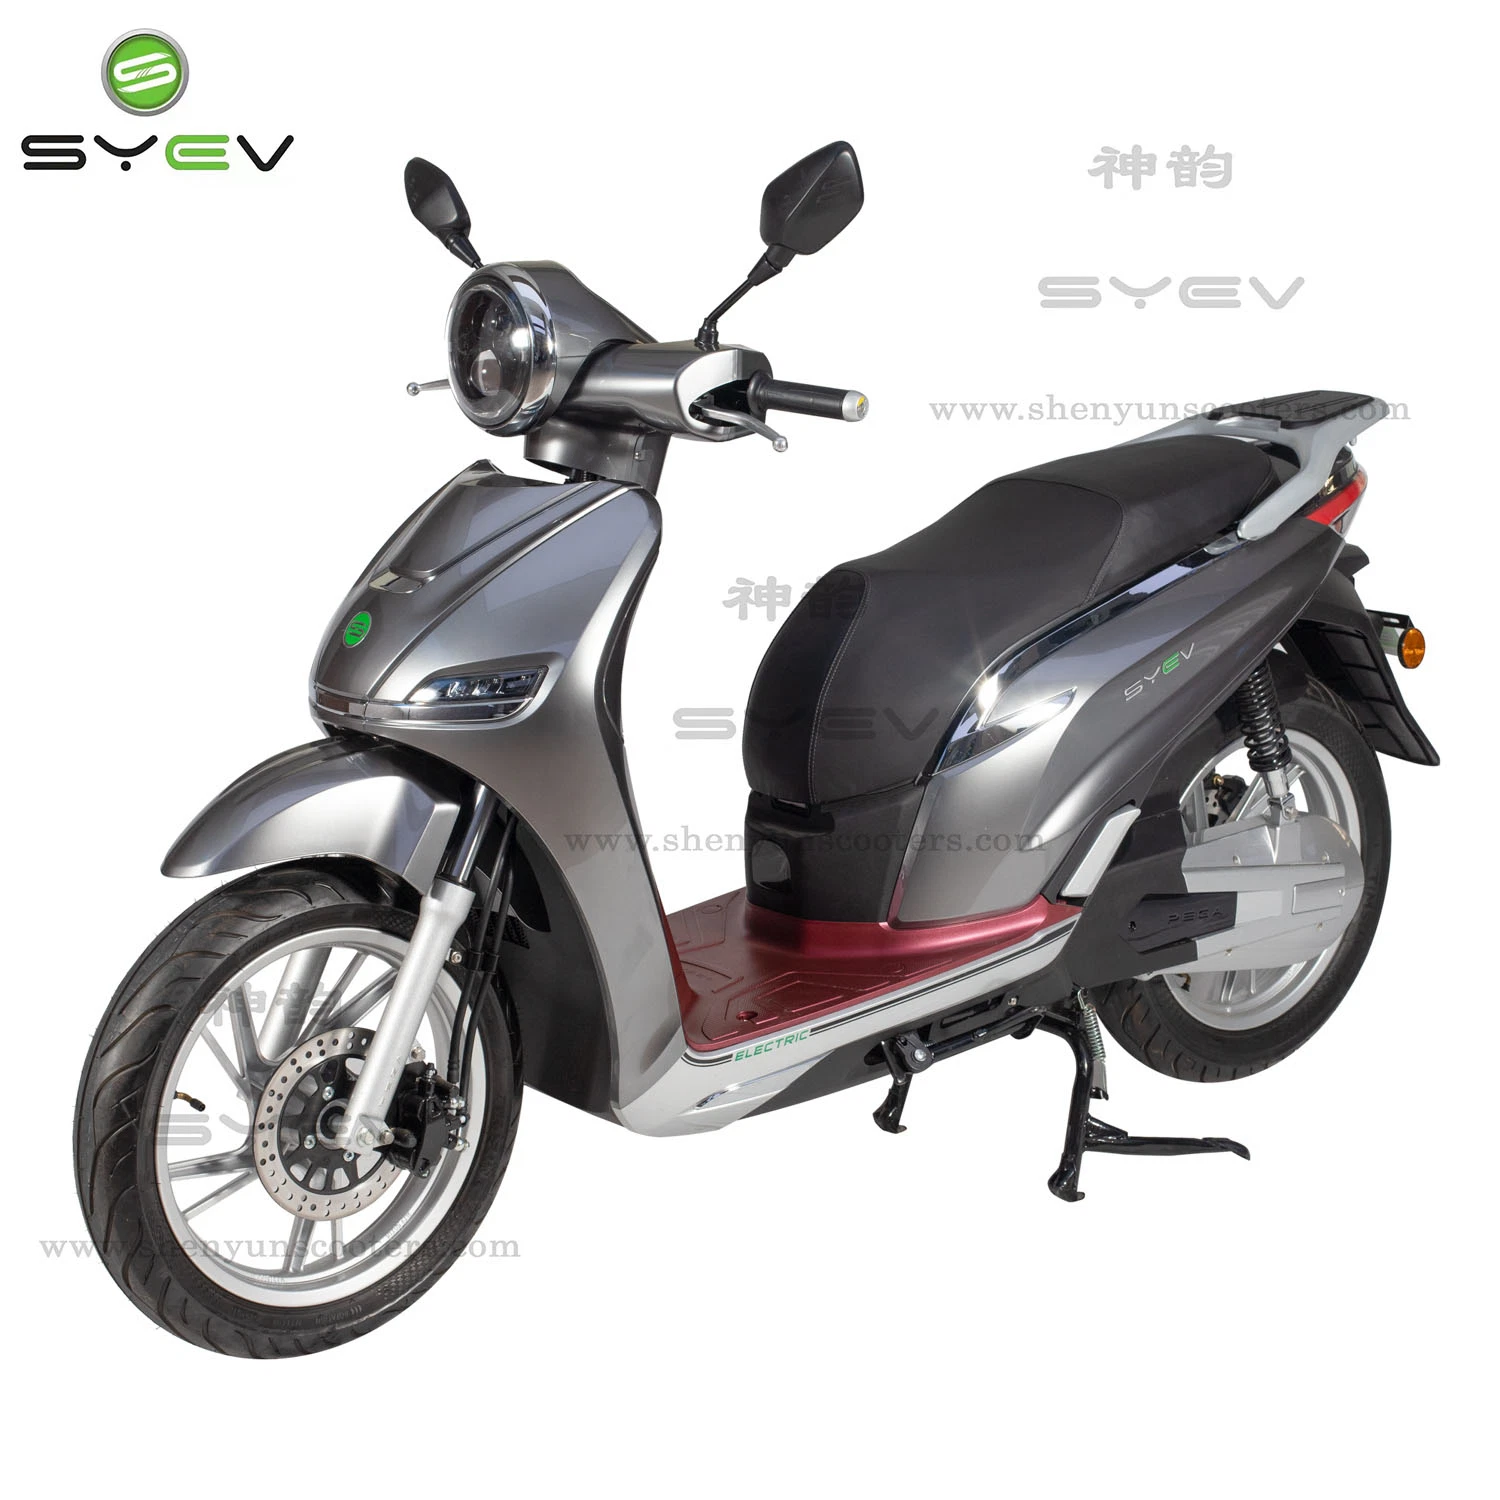 High-End Powerful Motor 72V45ah Lithium Battery Electric Motorcycle E-Bike E-Scooter with EEC